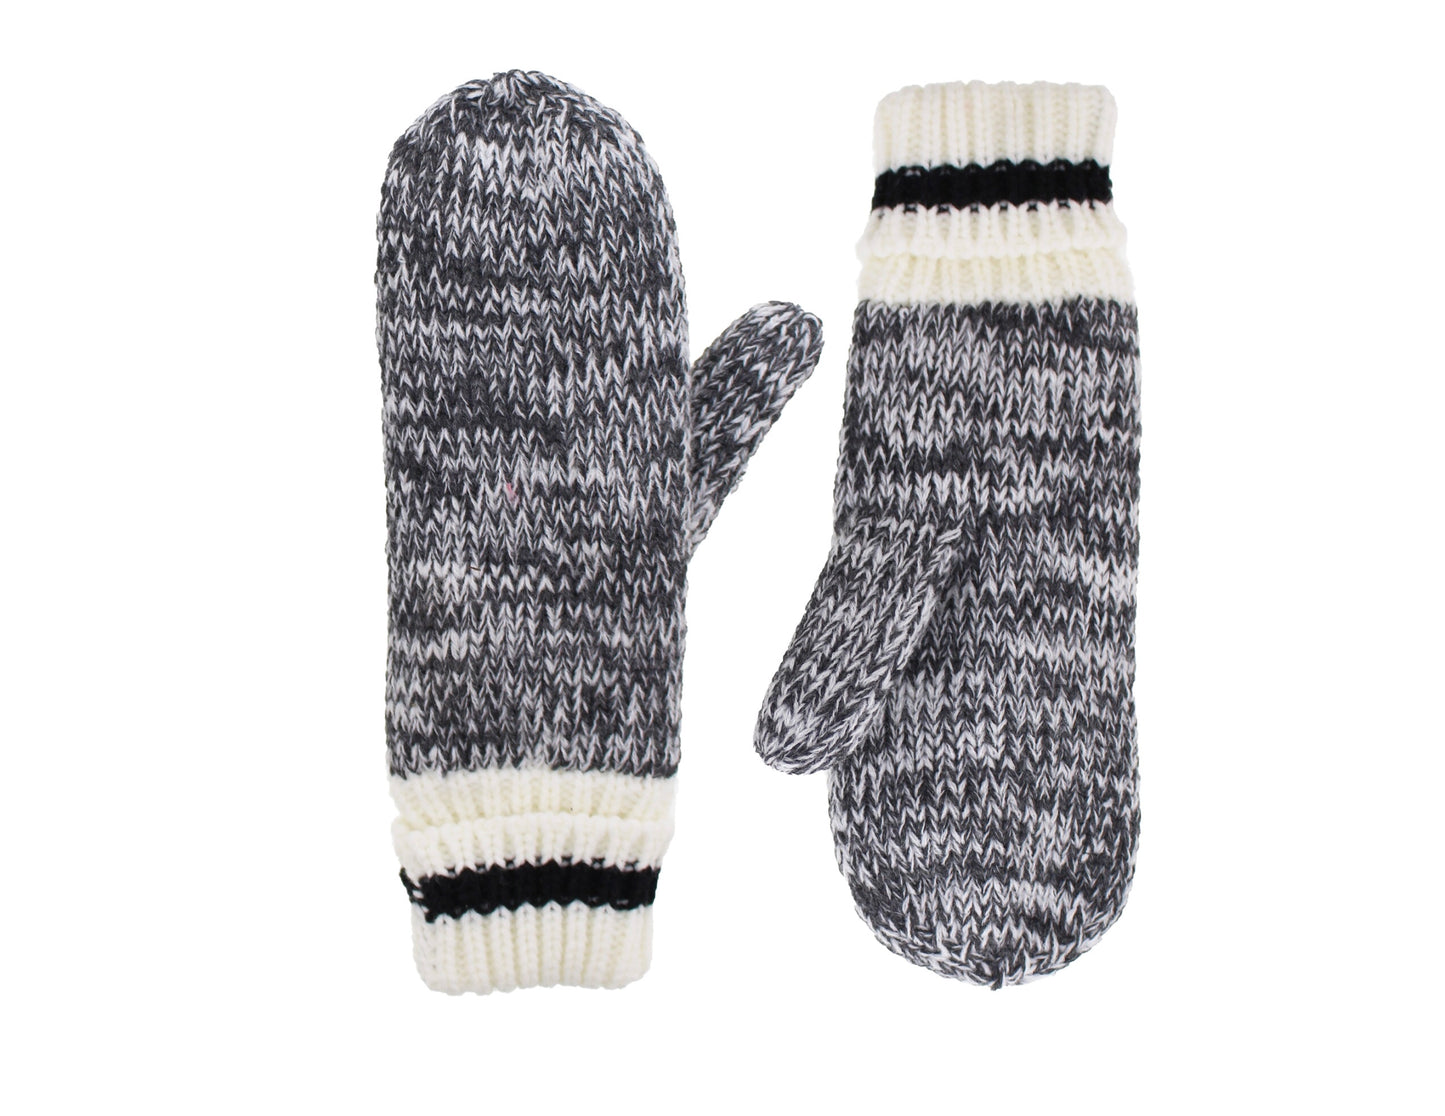 Ladies Sherpa Lined Cabin Mittens